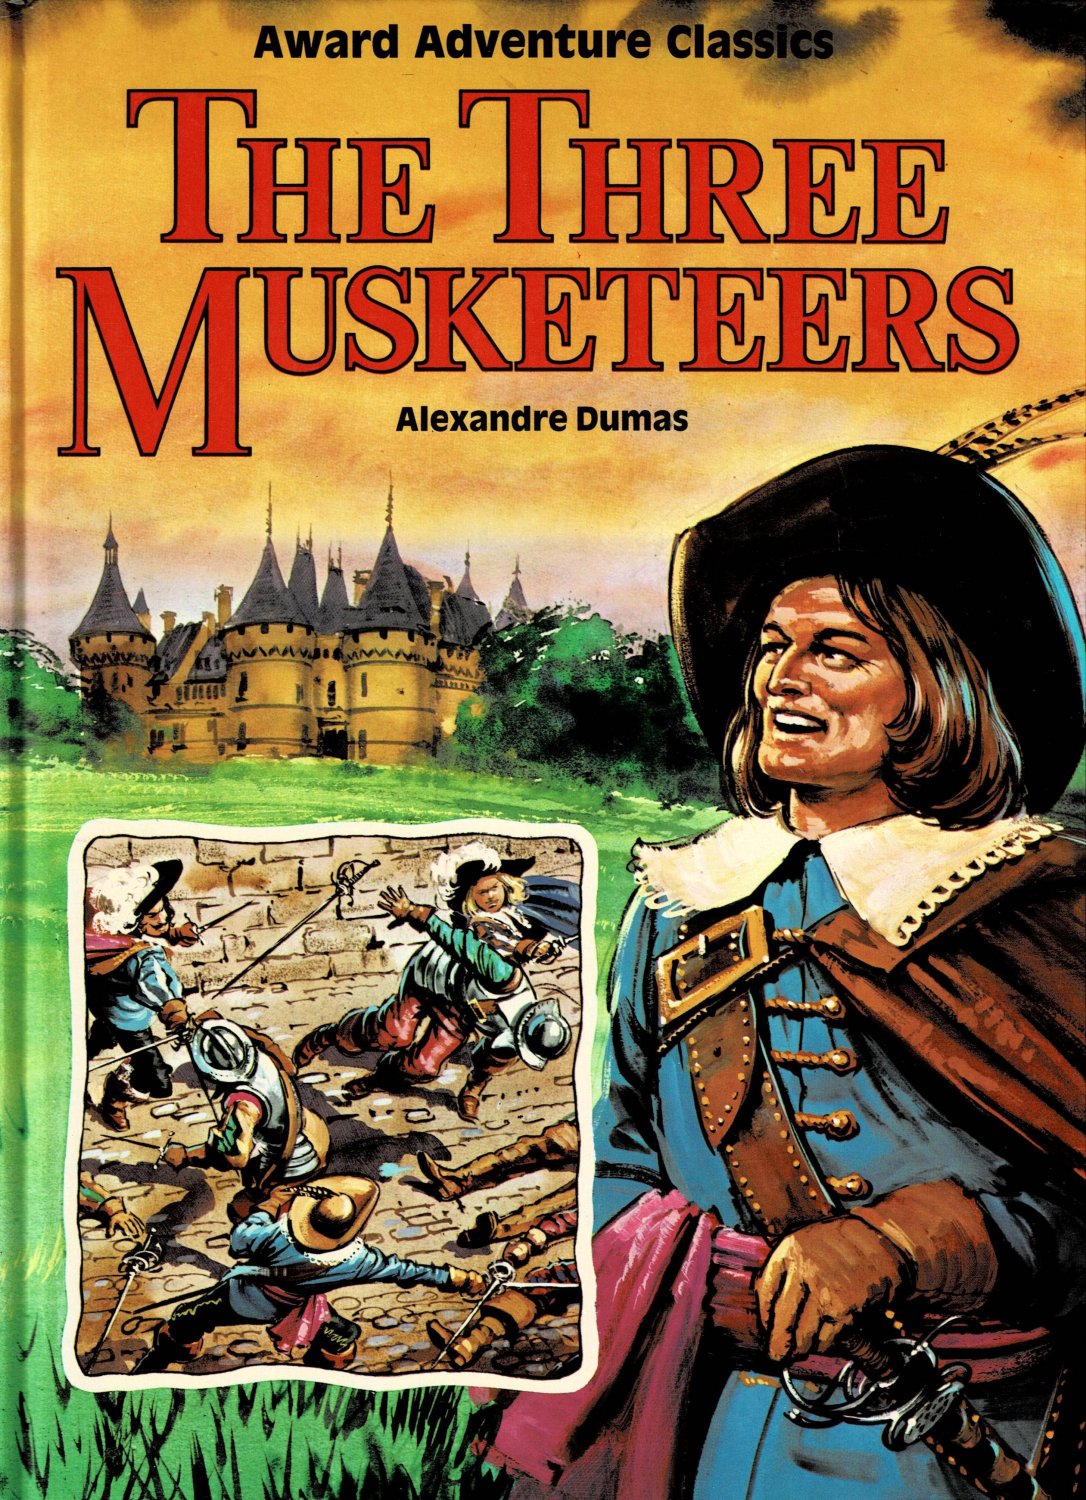 The Three Musketeers Alexandre Dumas By Jane Carruth Adventure Classics Large Hardcover Book 1982